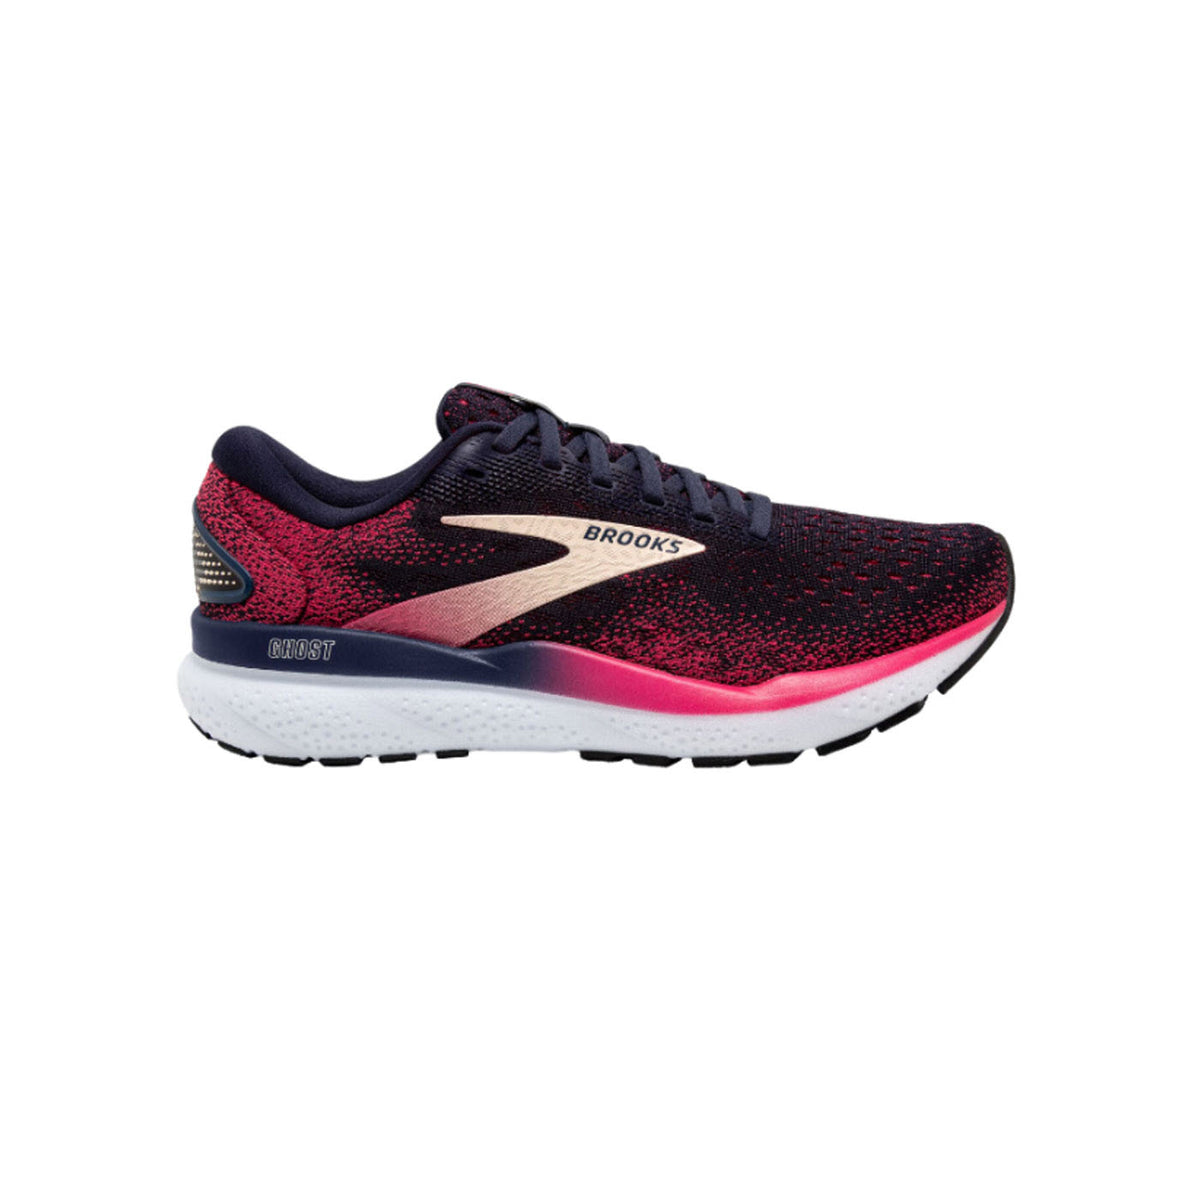 A single athletic shoe in navy, pink, and white with the brand name &quot;Brooks&quot; on the side. This stylish piece forms part of the BROOKS GHOST 16 PEACOAT/RASPBERRY/APRICOT - WOMENS series of running shoes.